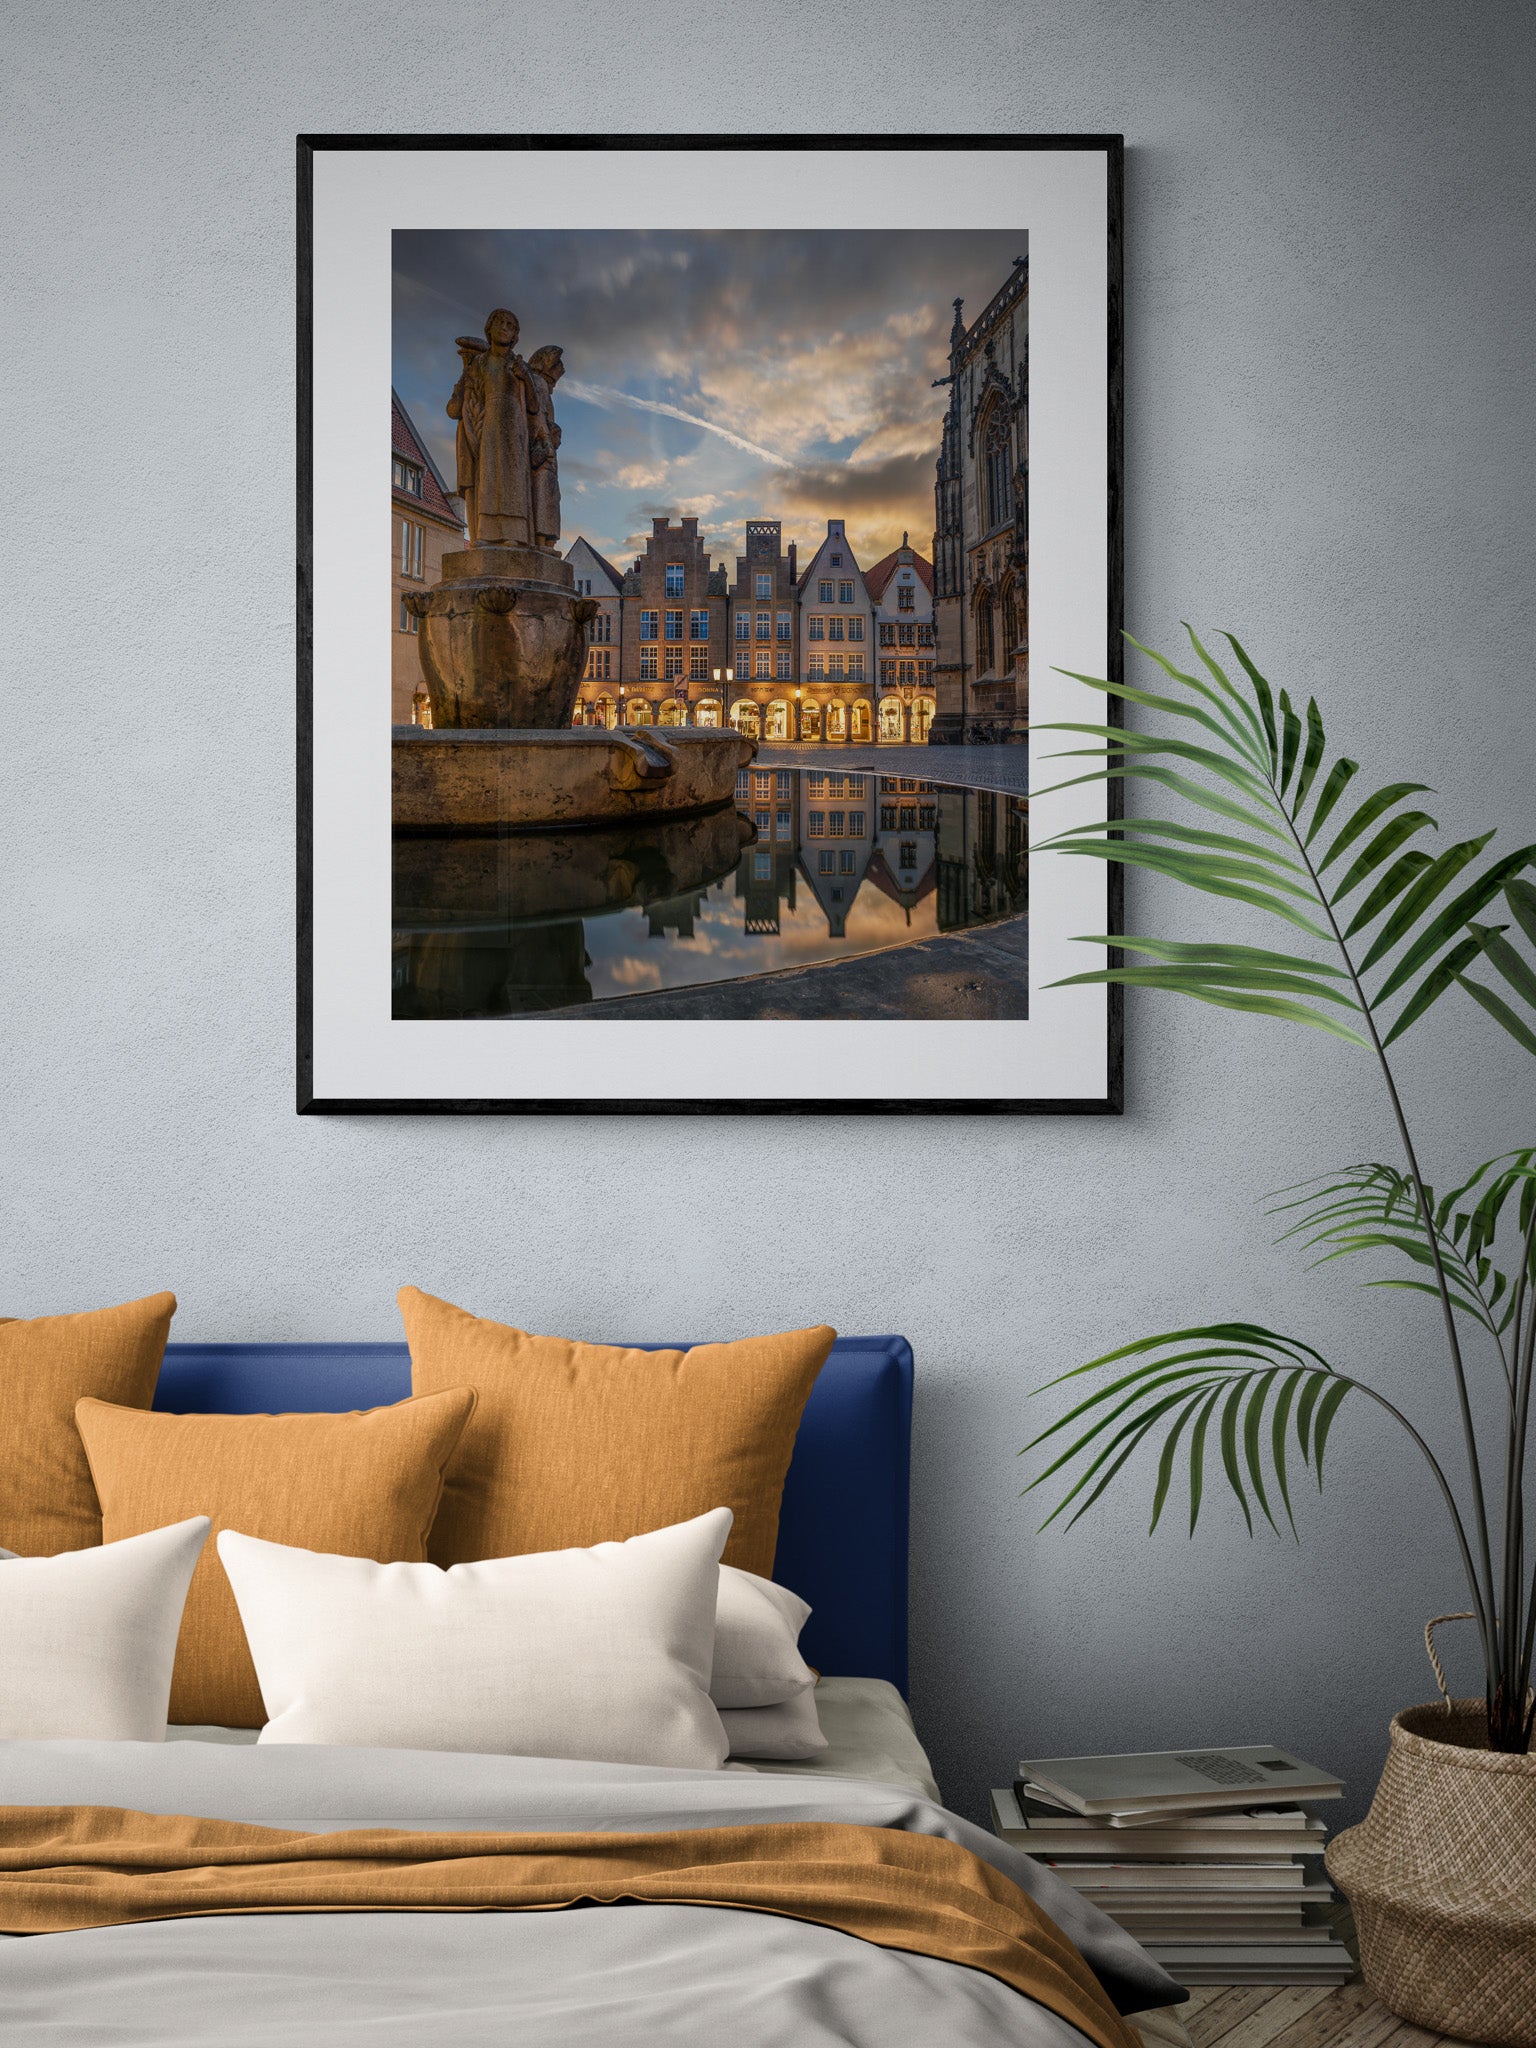 Image Title: Well, it's Münster!  Photographer: Marcus Danz Location: Münster, Germany Image description: Münster's ”Prinzipalmarkt“ is reflected in the water of a fountain during sunset. High quality Fine Art print up to 36 inch / around 90 centimeters on Hahnemühle paper available. Large variant in bedroom.